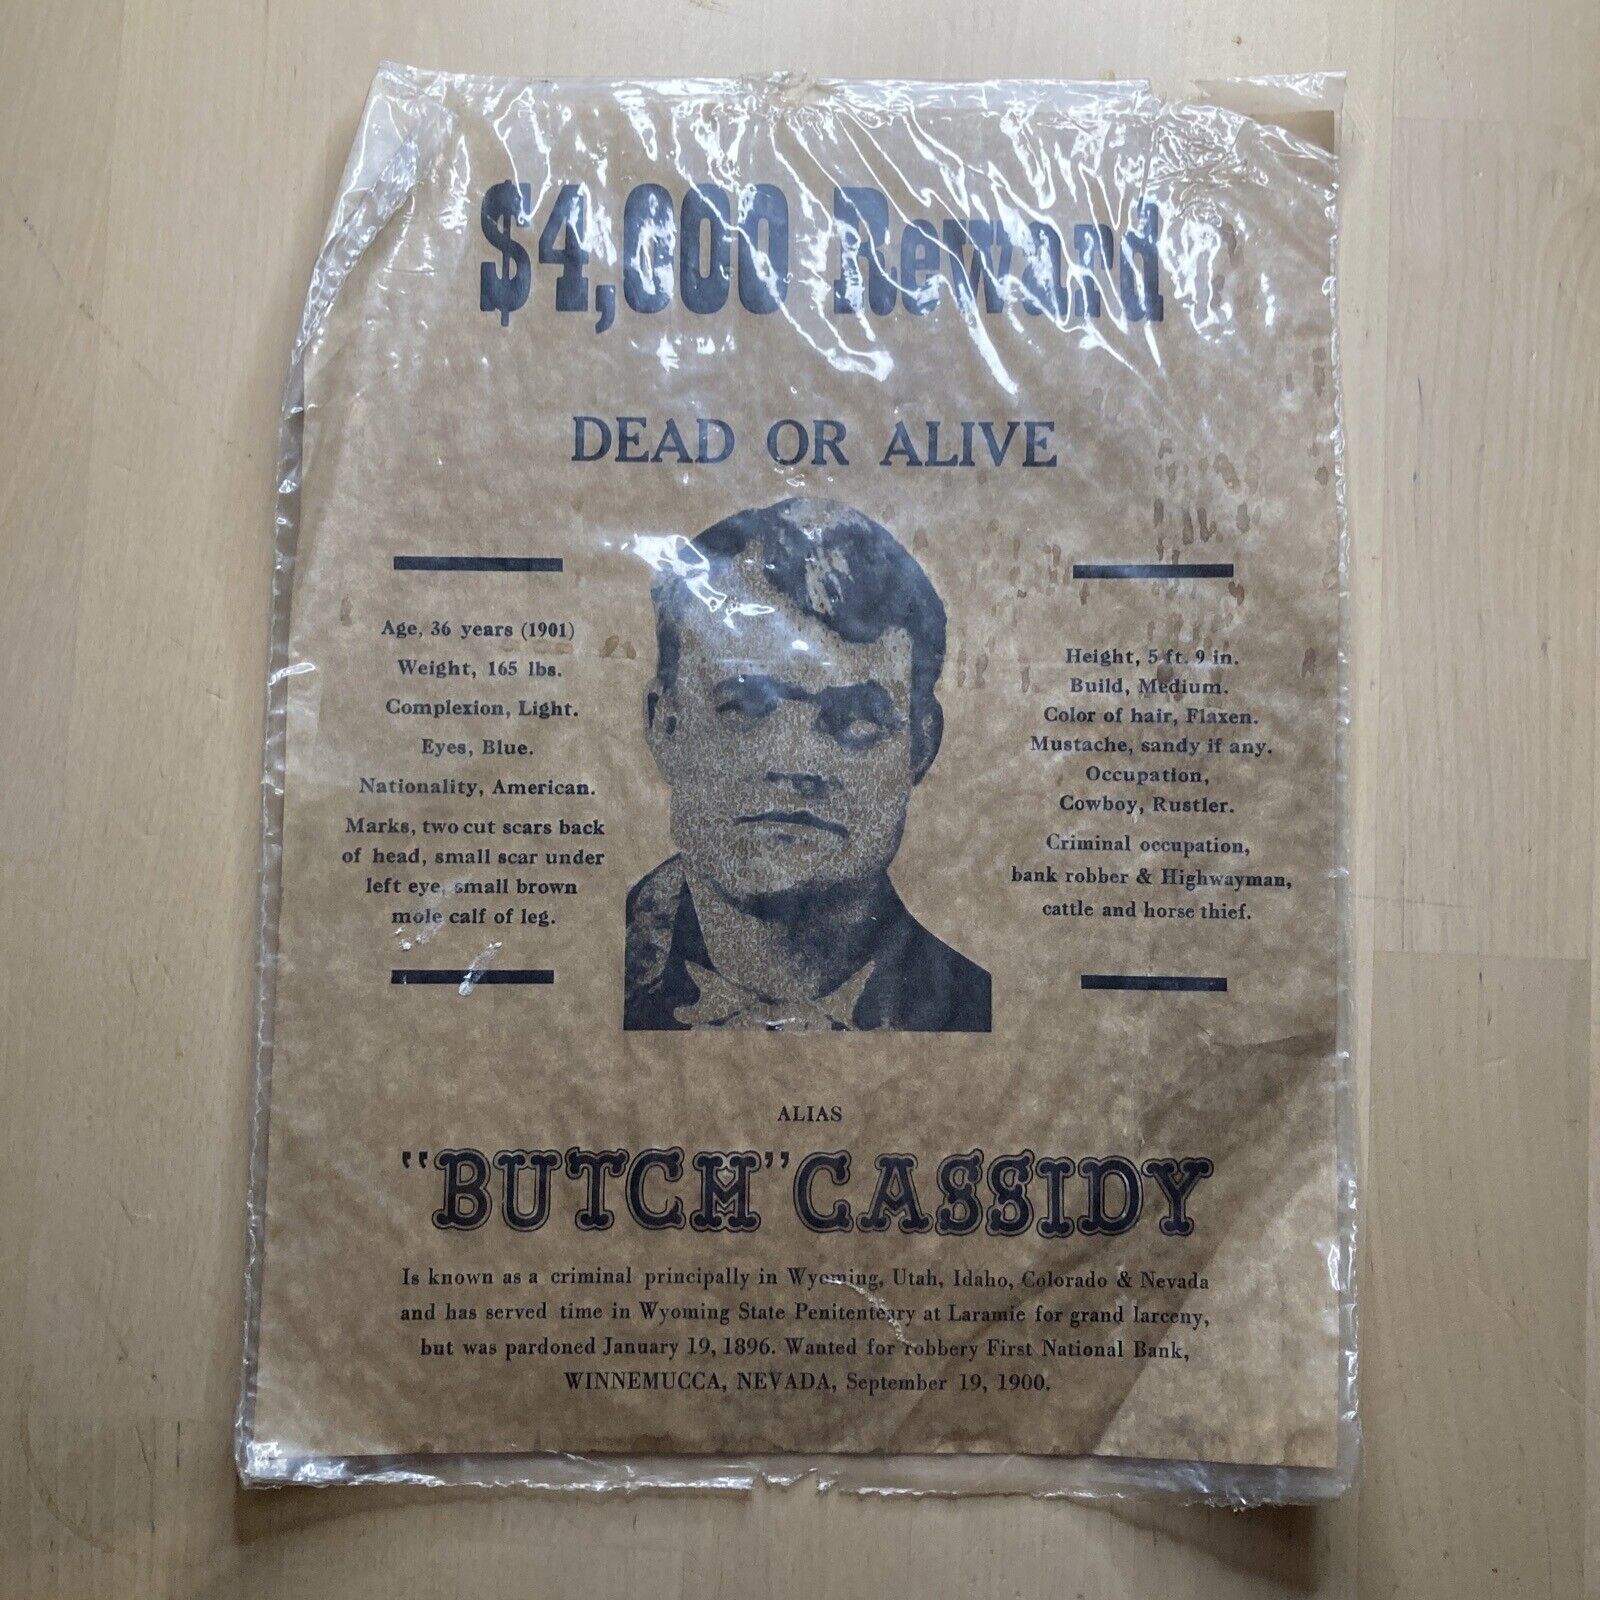 Butch Cassidy wanted poster - Wild West Western Outlaw